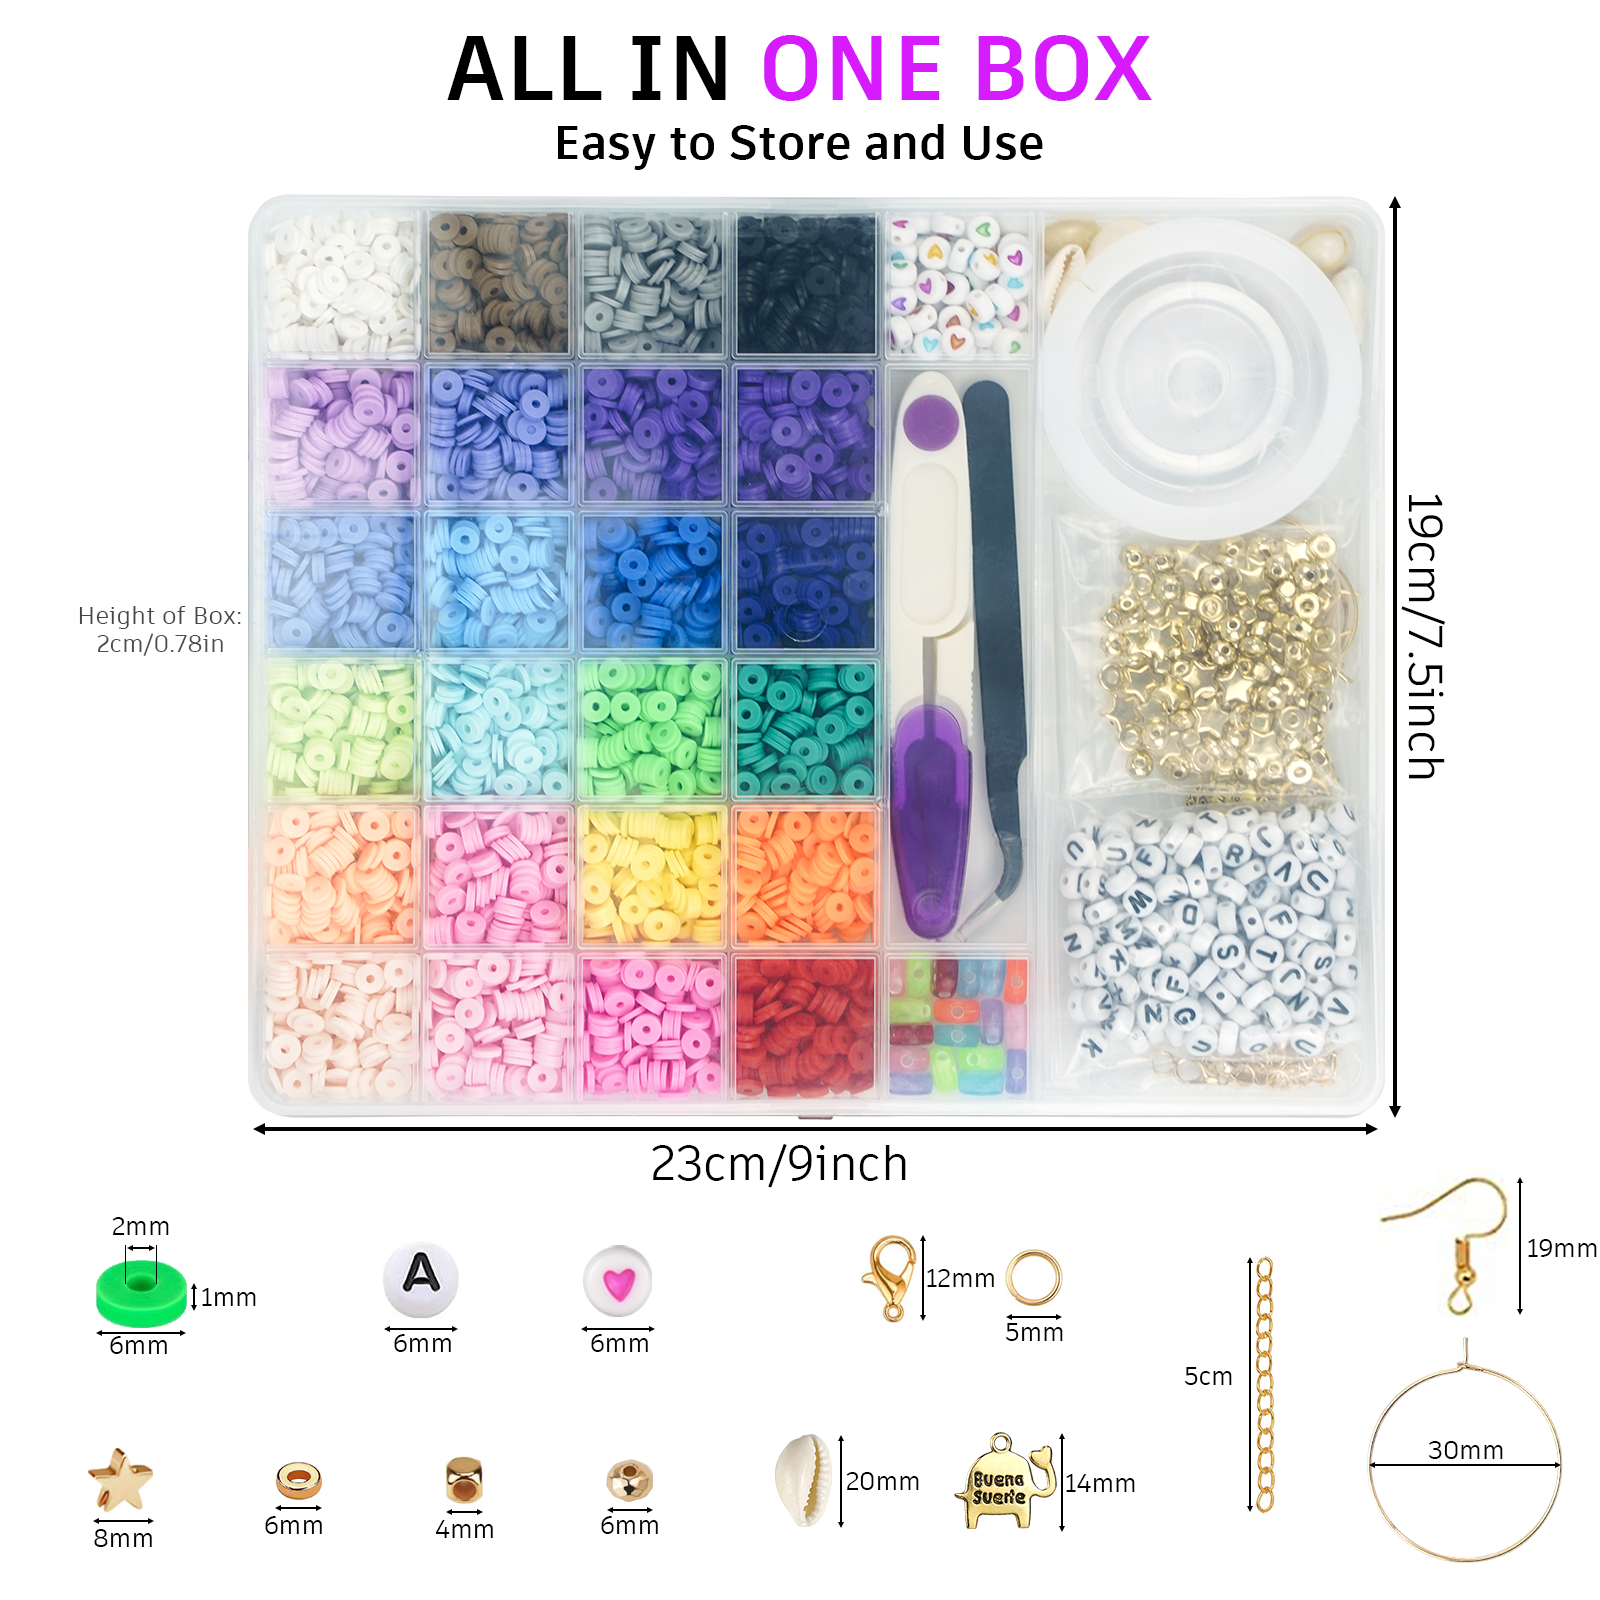 6000 Pcs Clay Beads for Bracelet Making, Gionlion 24 Colors Flat Round Polymer Clay Beads 6mm Spacer Heishi Beads with Pendant Charms Kit and Elastic Strings for Jewelry Making Kit Bracelets Necklace